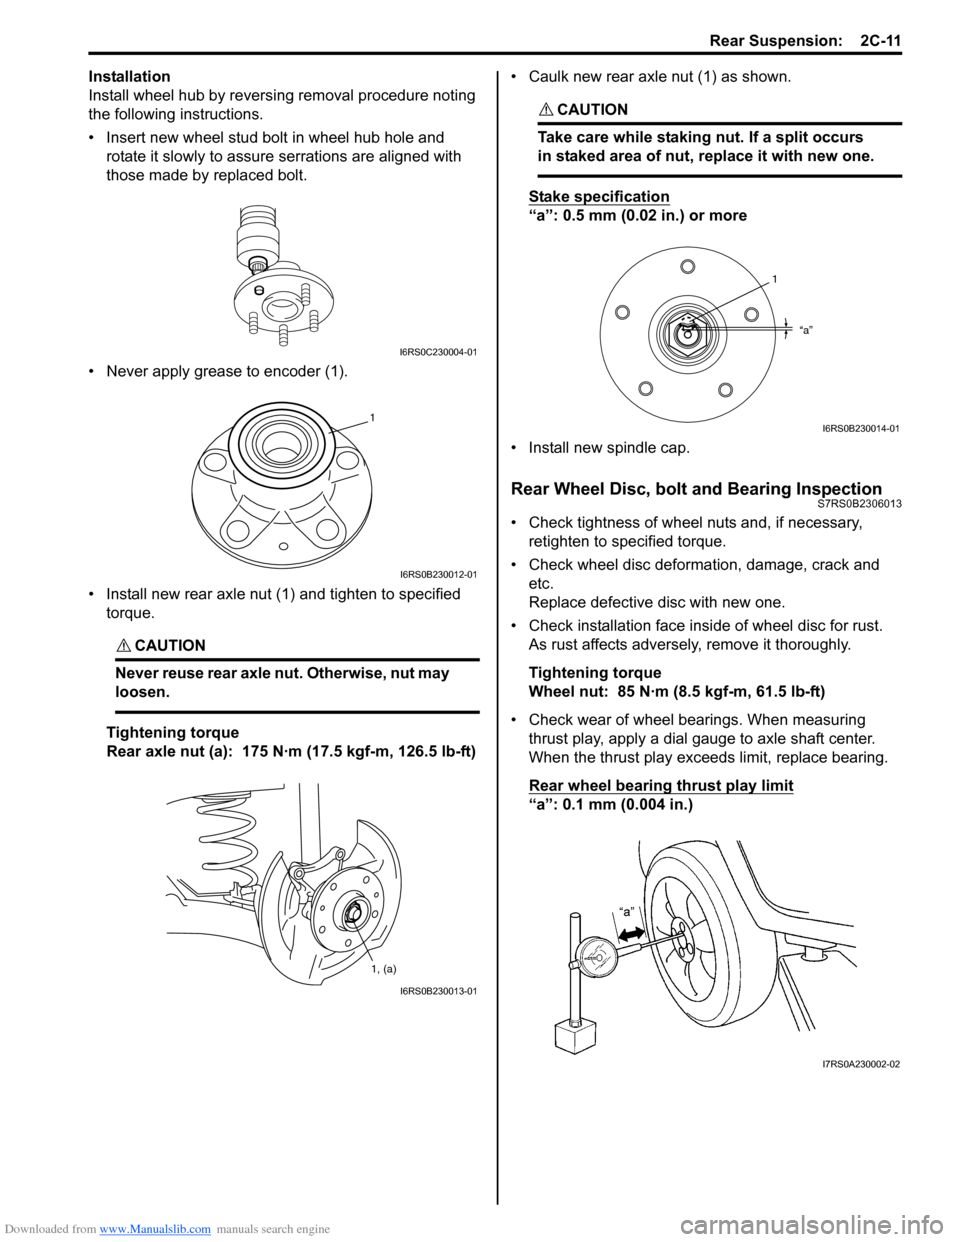 SUZUKI SWIFT 2005 2.G Service Workshop Manual Downloaded from www.Manualslib.com manuals search engine Rear Suspension:  2C-11
Installation
Install wheel hub by reversing removal procedure noting 
the following instructions.
• Insert new wheel 